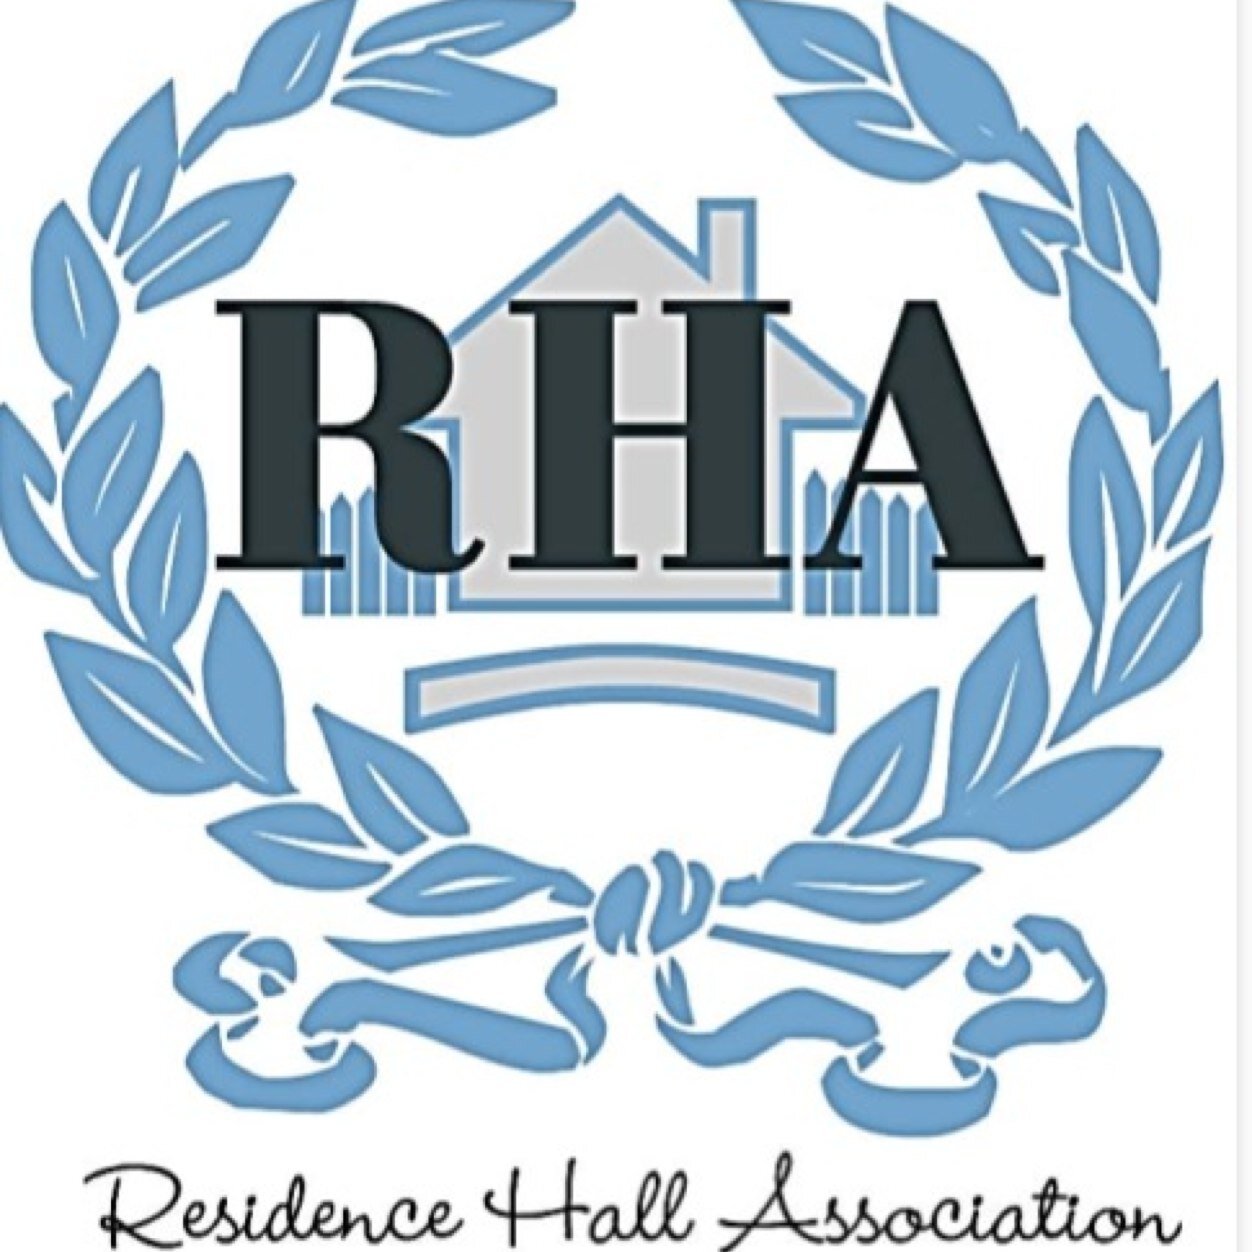 RHA works as a resident empowering unit to build communities through activism, leadership,  and social and educational programming. myscrha@gmail.com